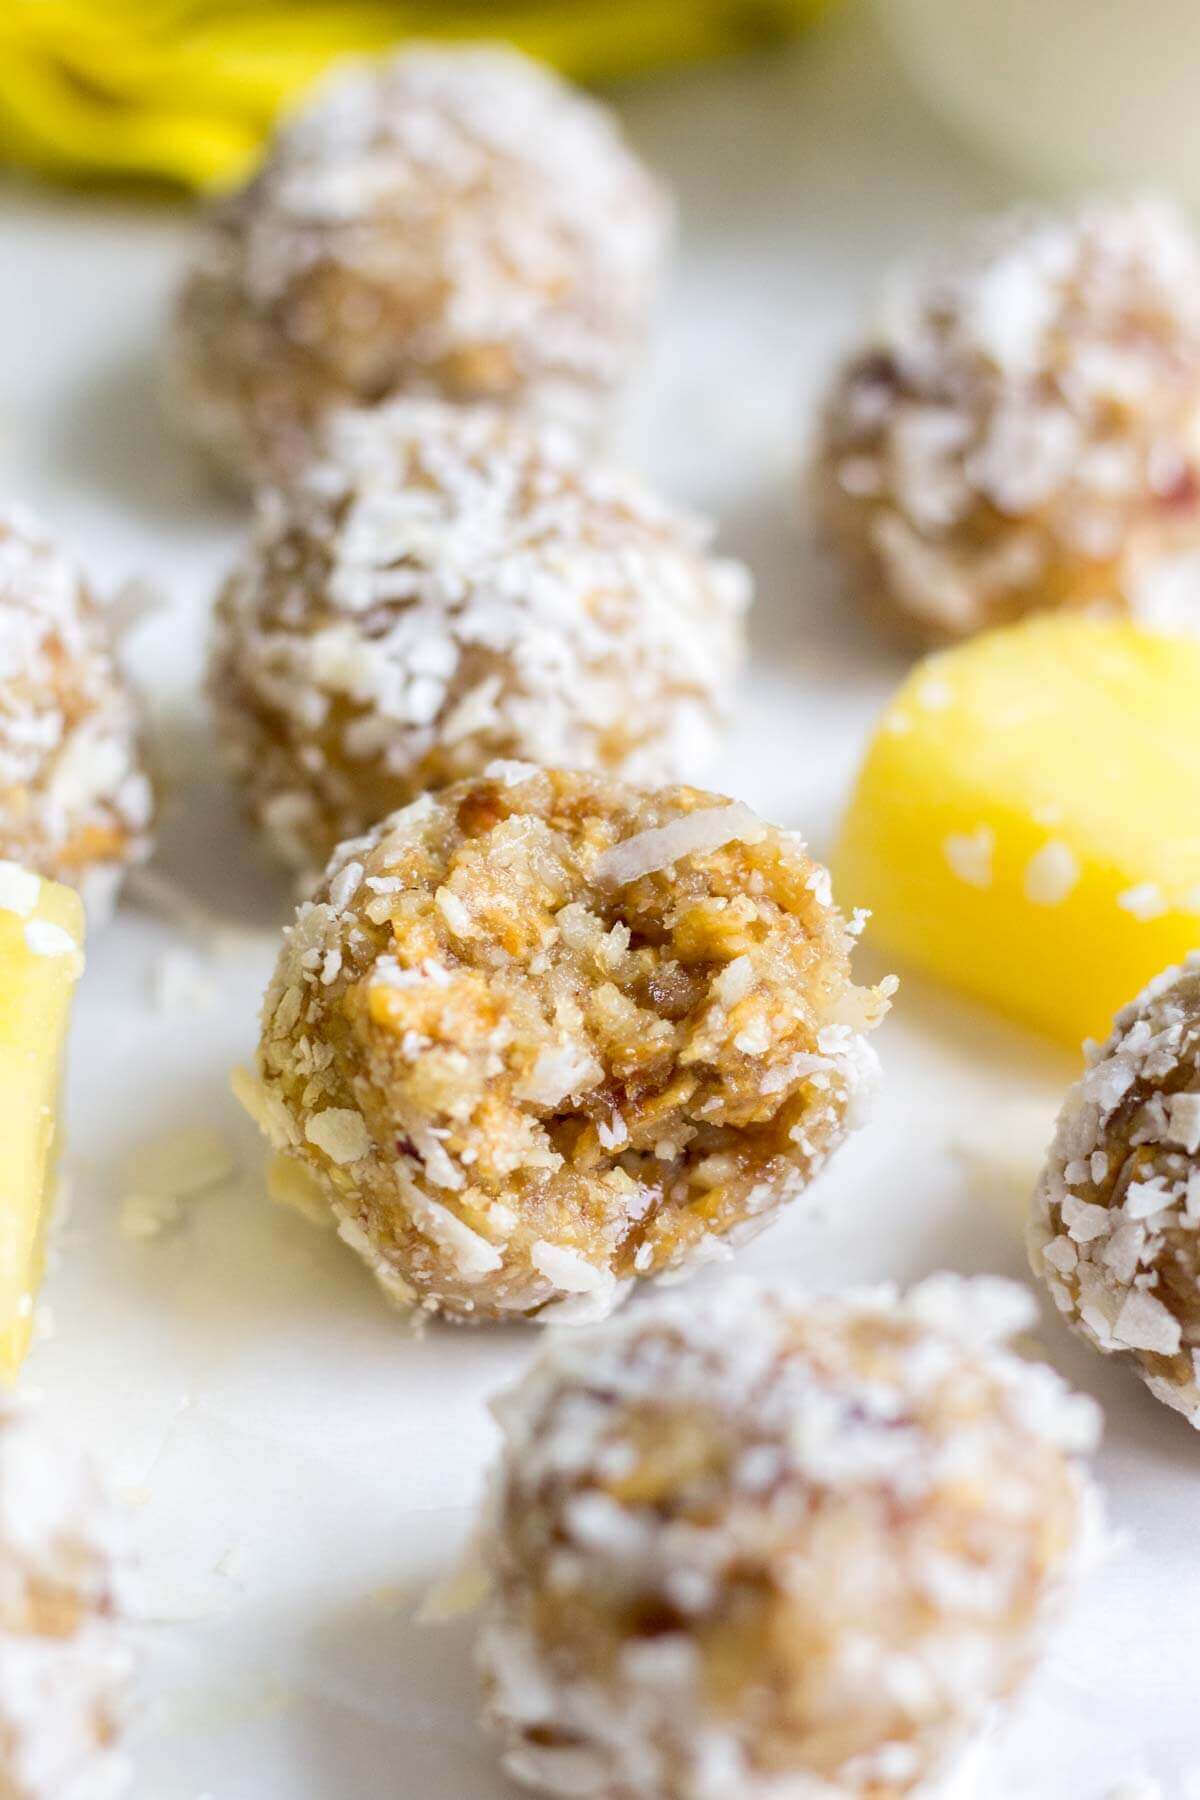 Healthy and filled with energizing ingredients, these pina colada energy bites are a sweet and healthy snack that will keep you satisfied all day. It's made with raw ingredients like cashews and macadamia nuts, plus dried fruit and coconut. This energy bite recipe will transport you to the beach!